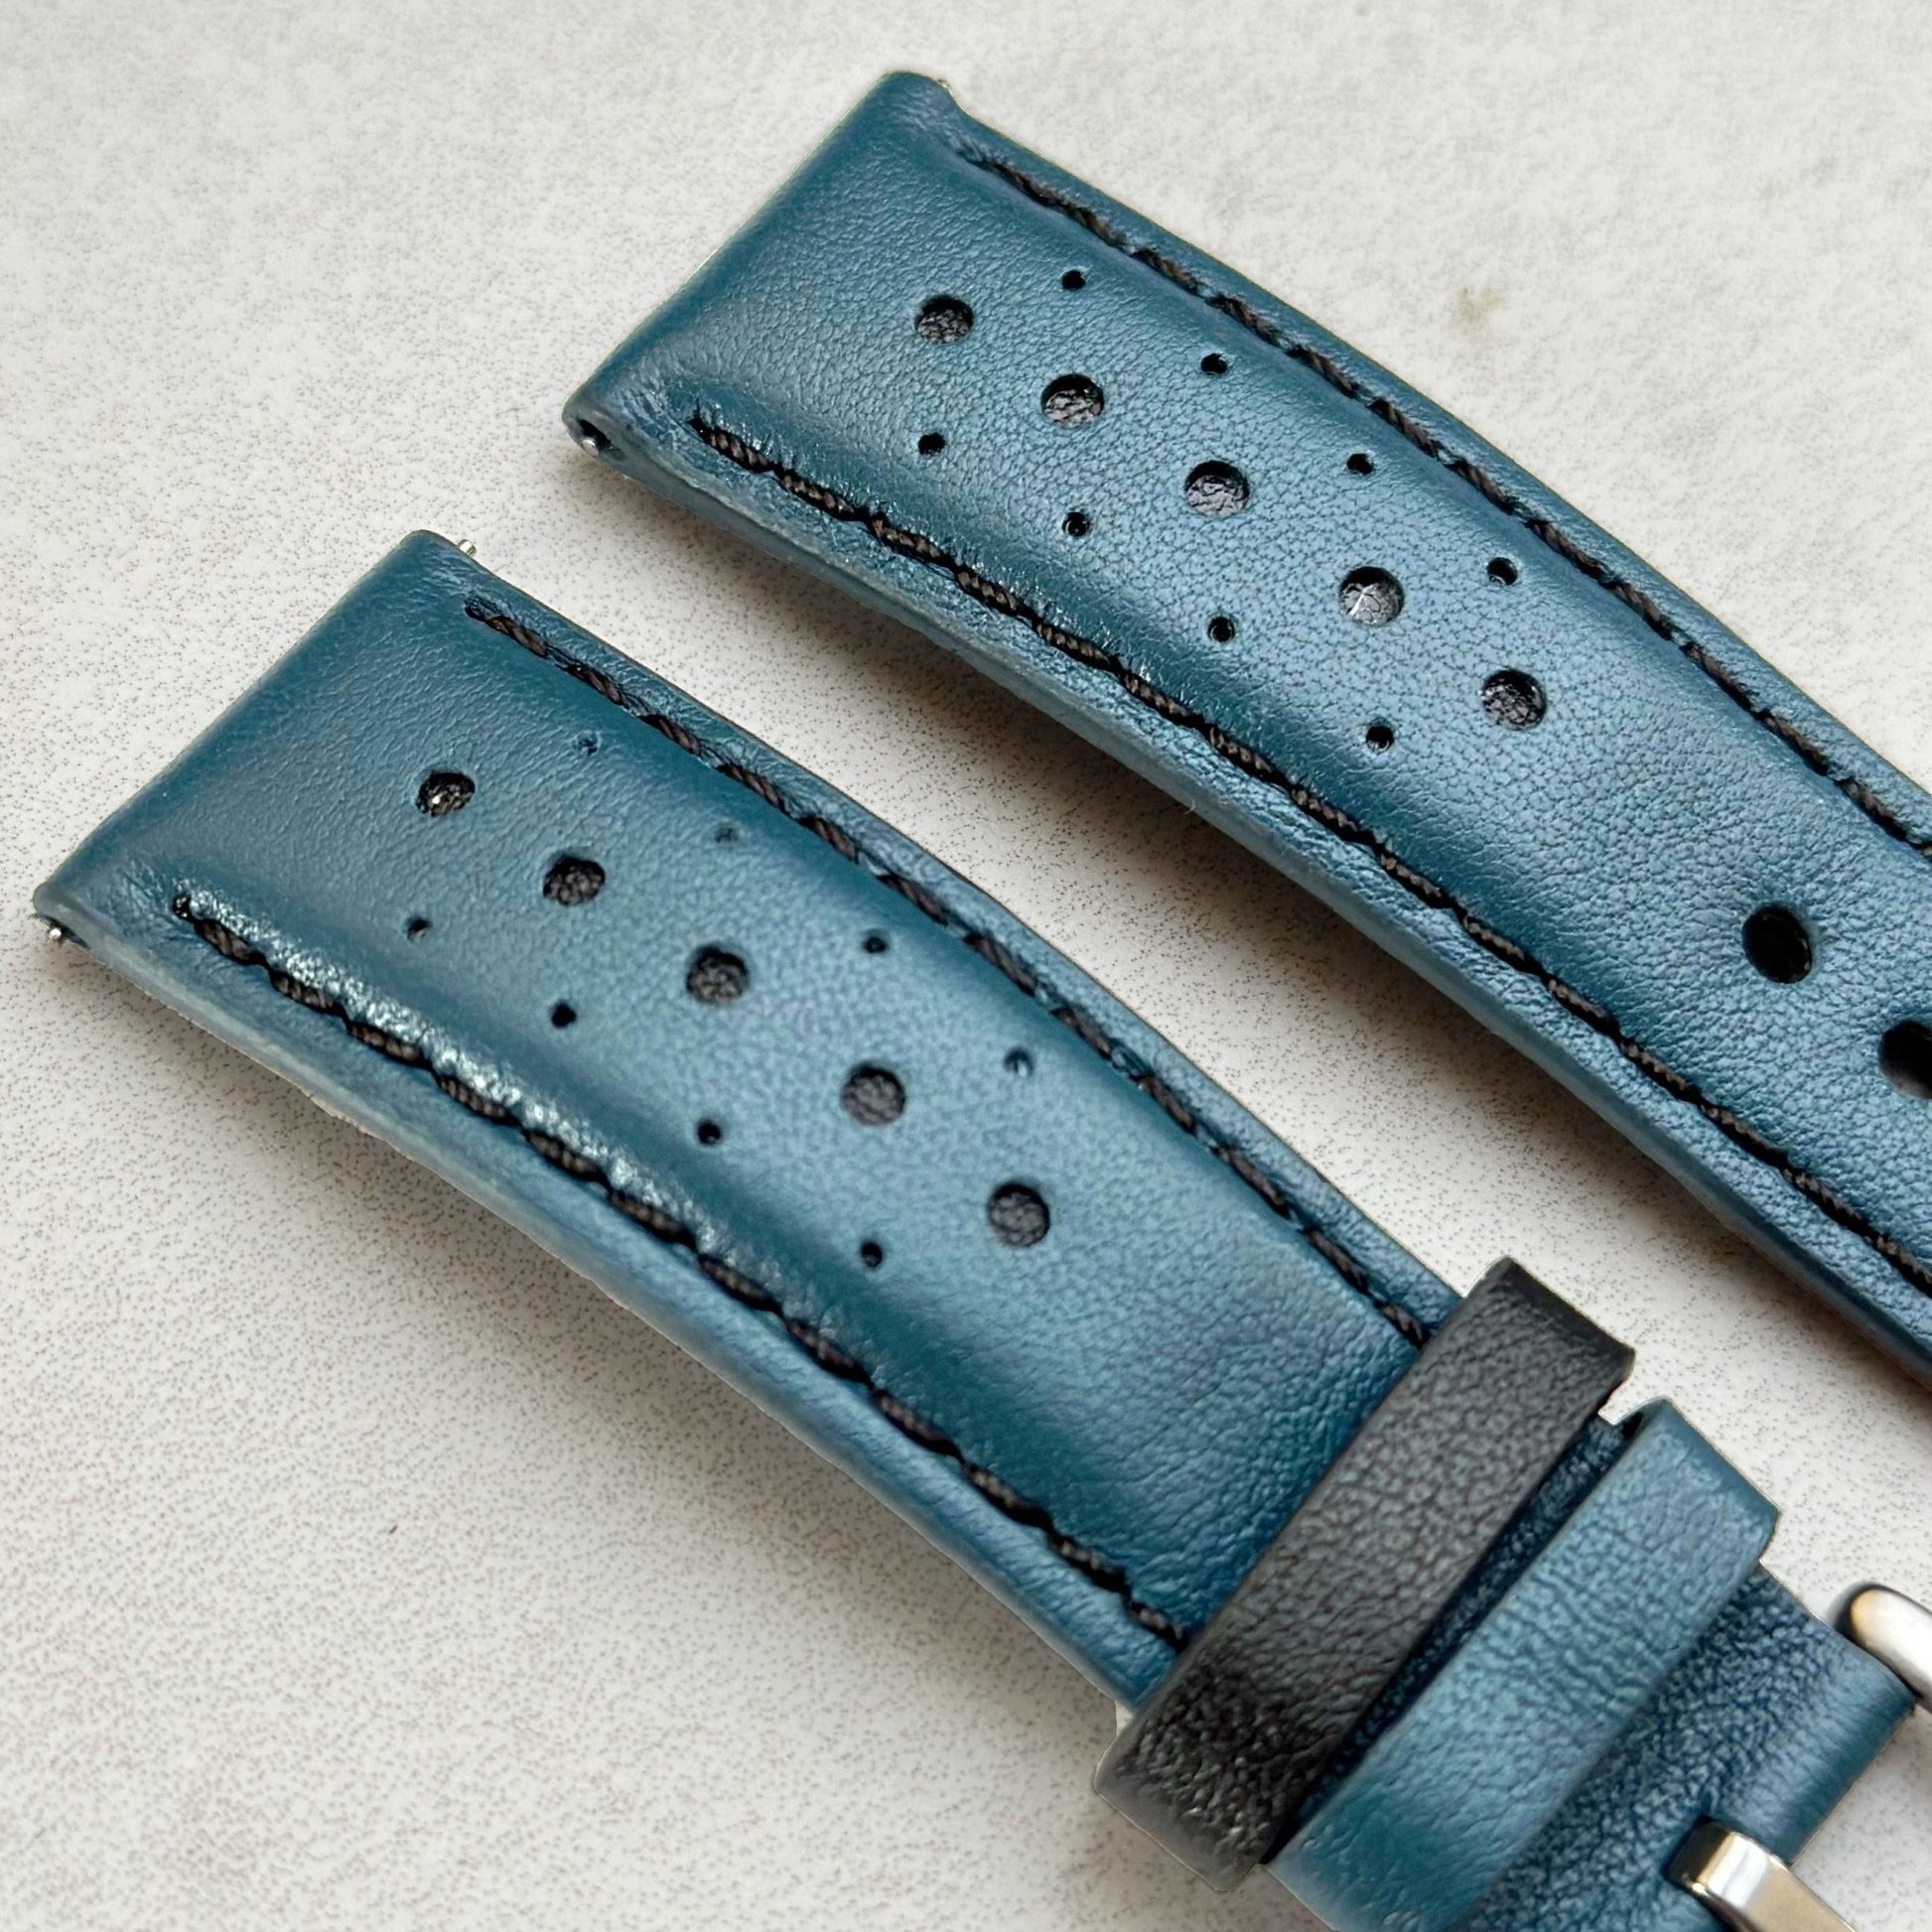 Padded leather racing watch strap. Petrol blue and black full grain leather.